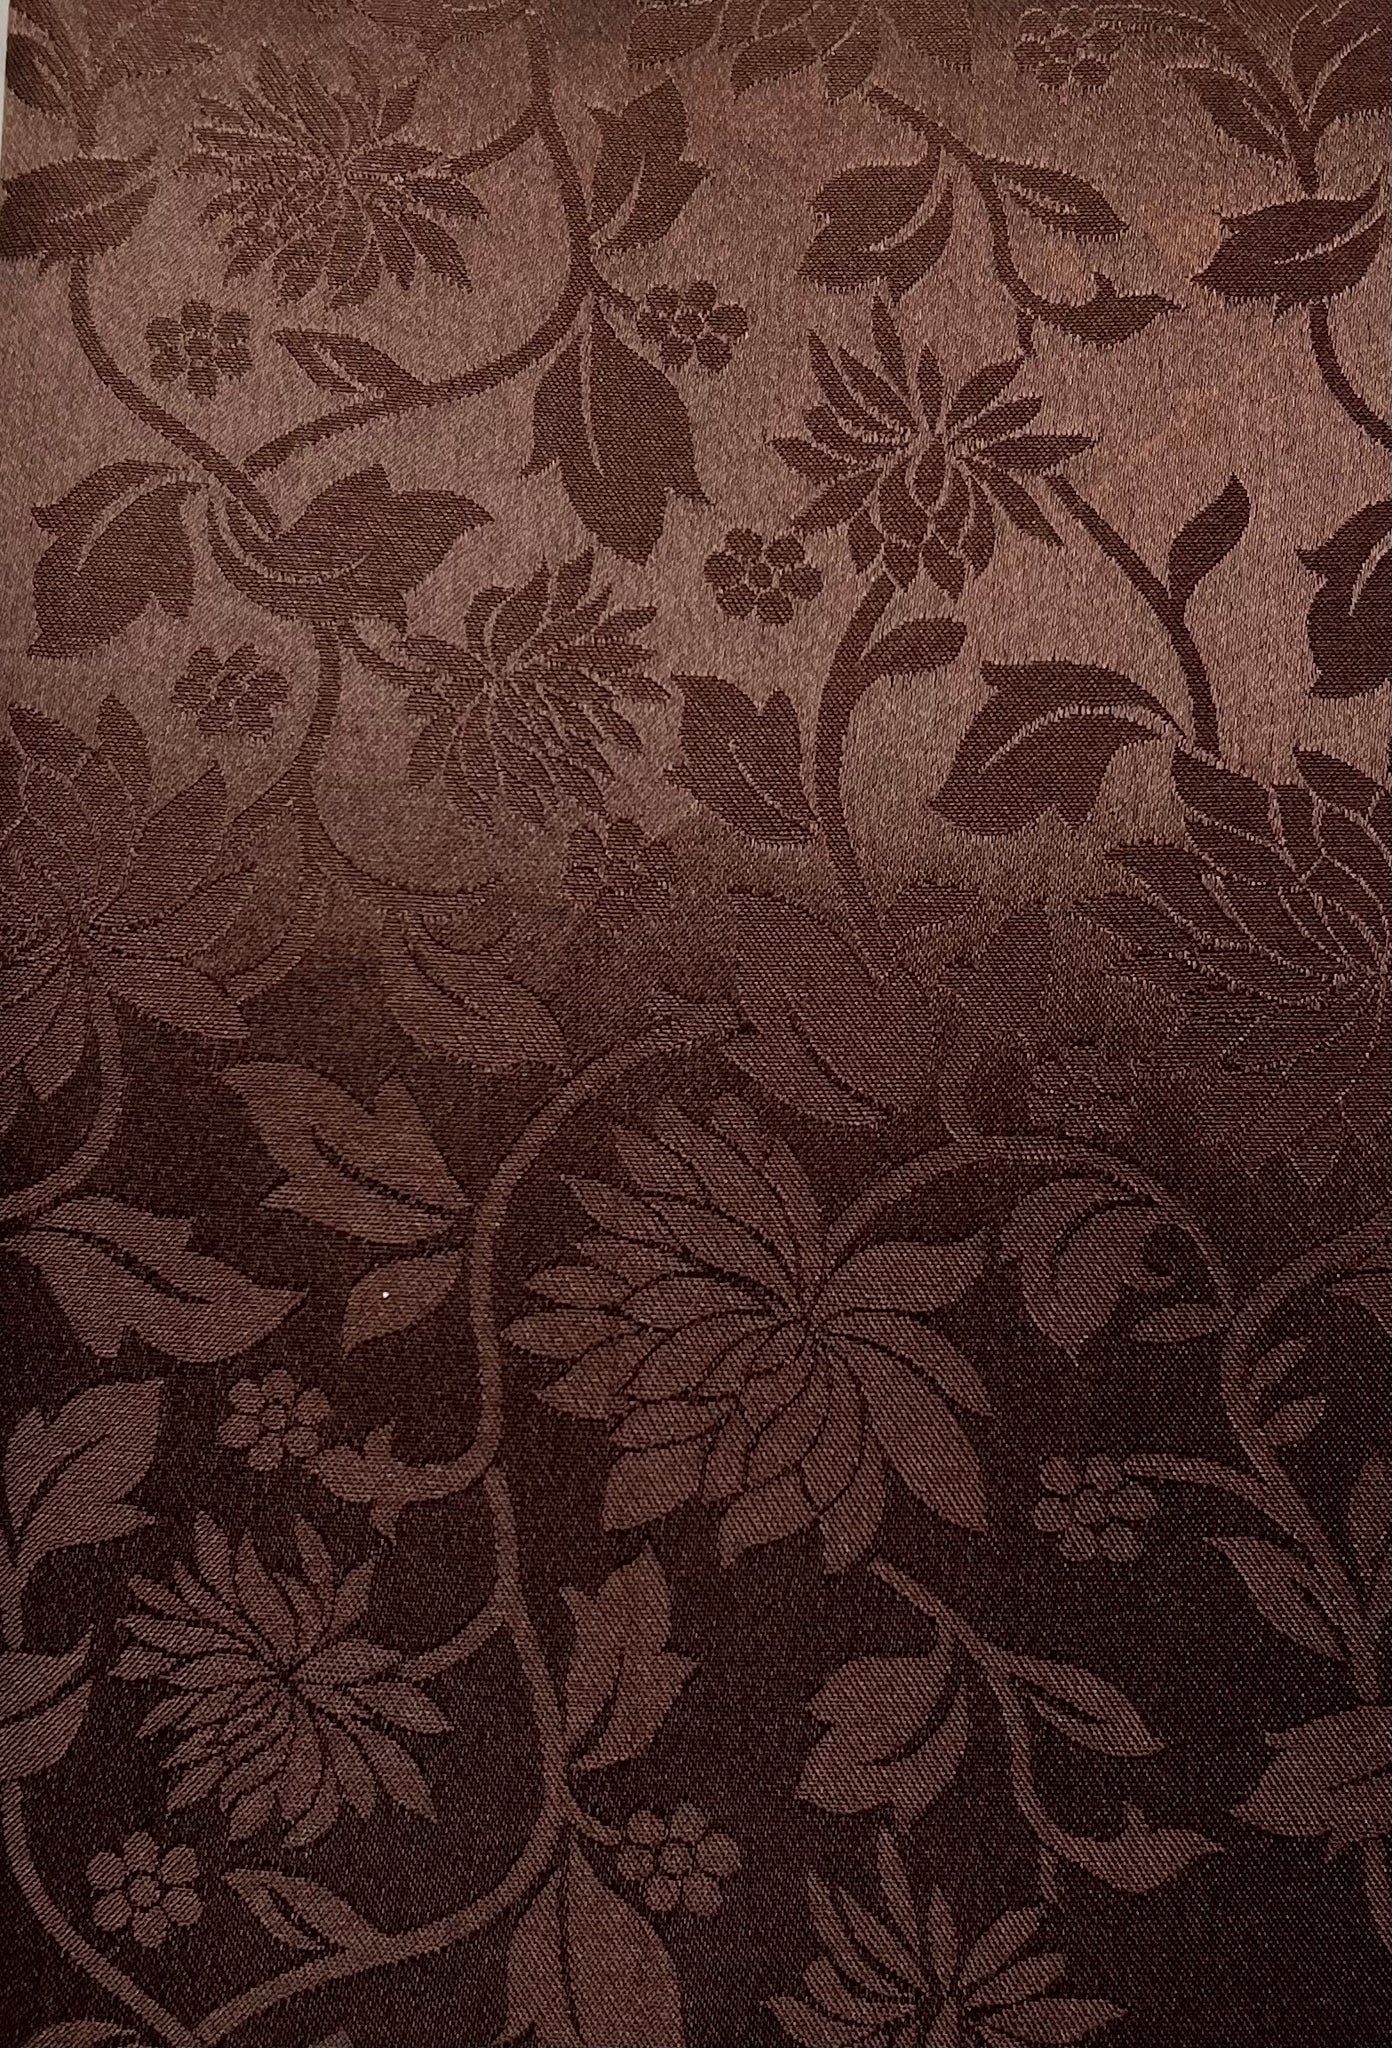 Table Cloth- Floral- Chocolate Brown -Scalloped Edge